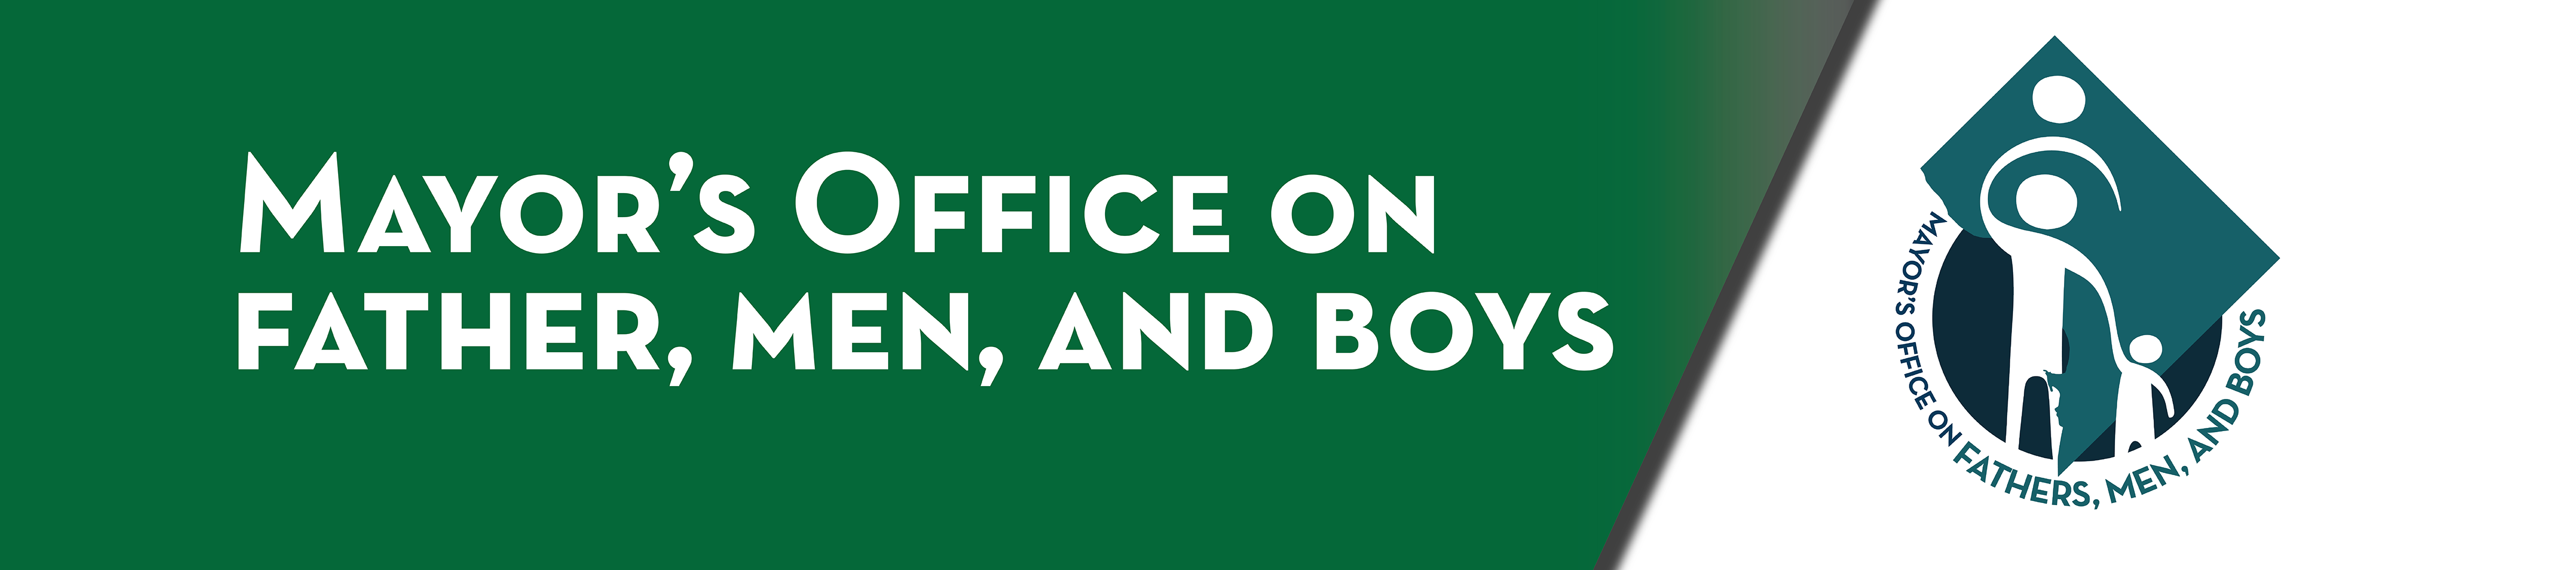 Mayor’s Office on Fathers, Men and Boys